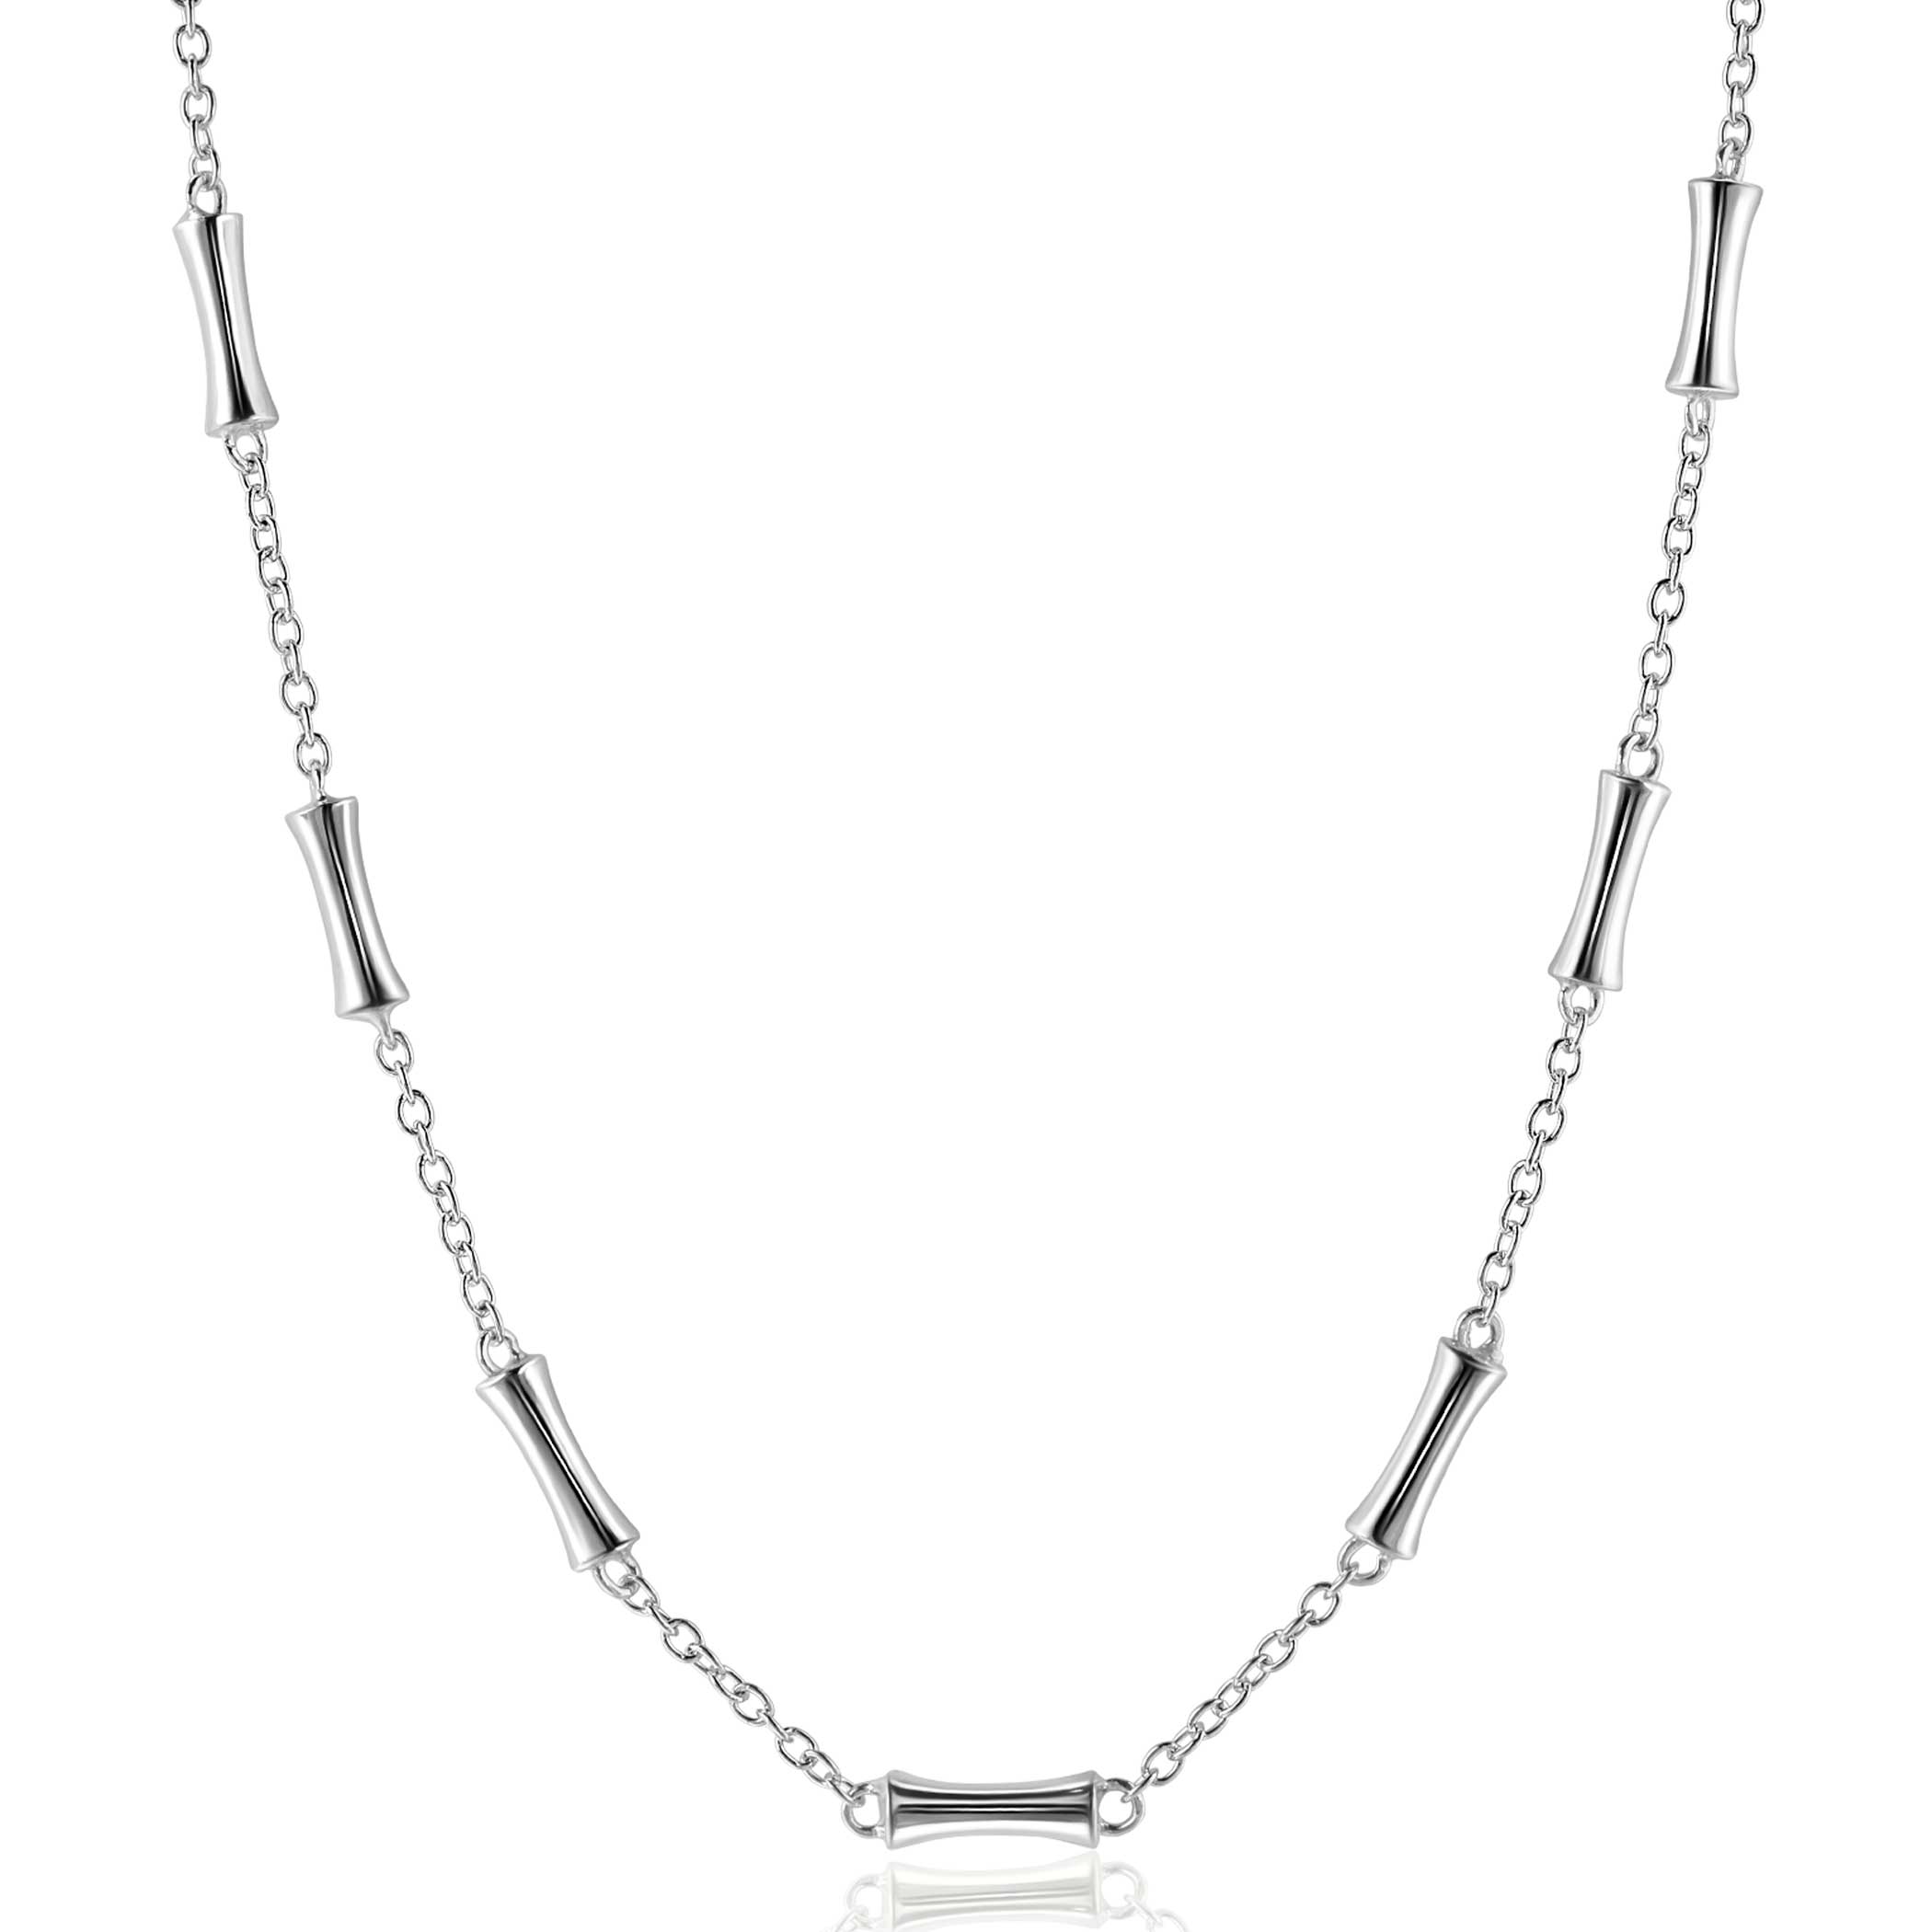 ZINZI silver link necklace with seven smooth bamboo shapes 40-45cm ZIC2577
